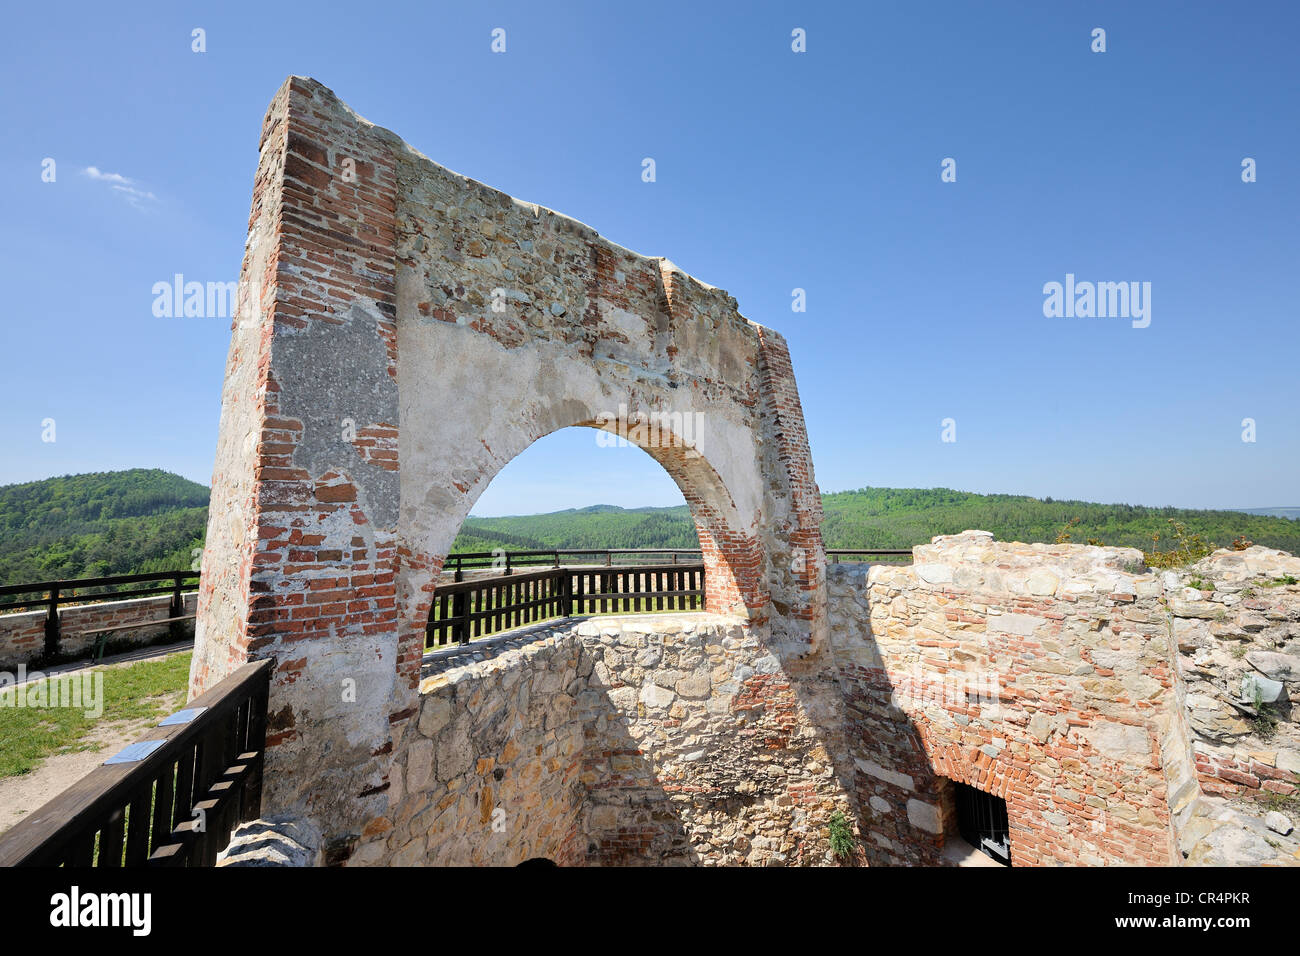 At the tower of Landsee castle ruins, Burgenland, Austria, Europe Stock Photo